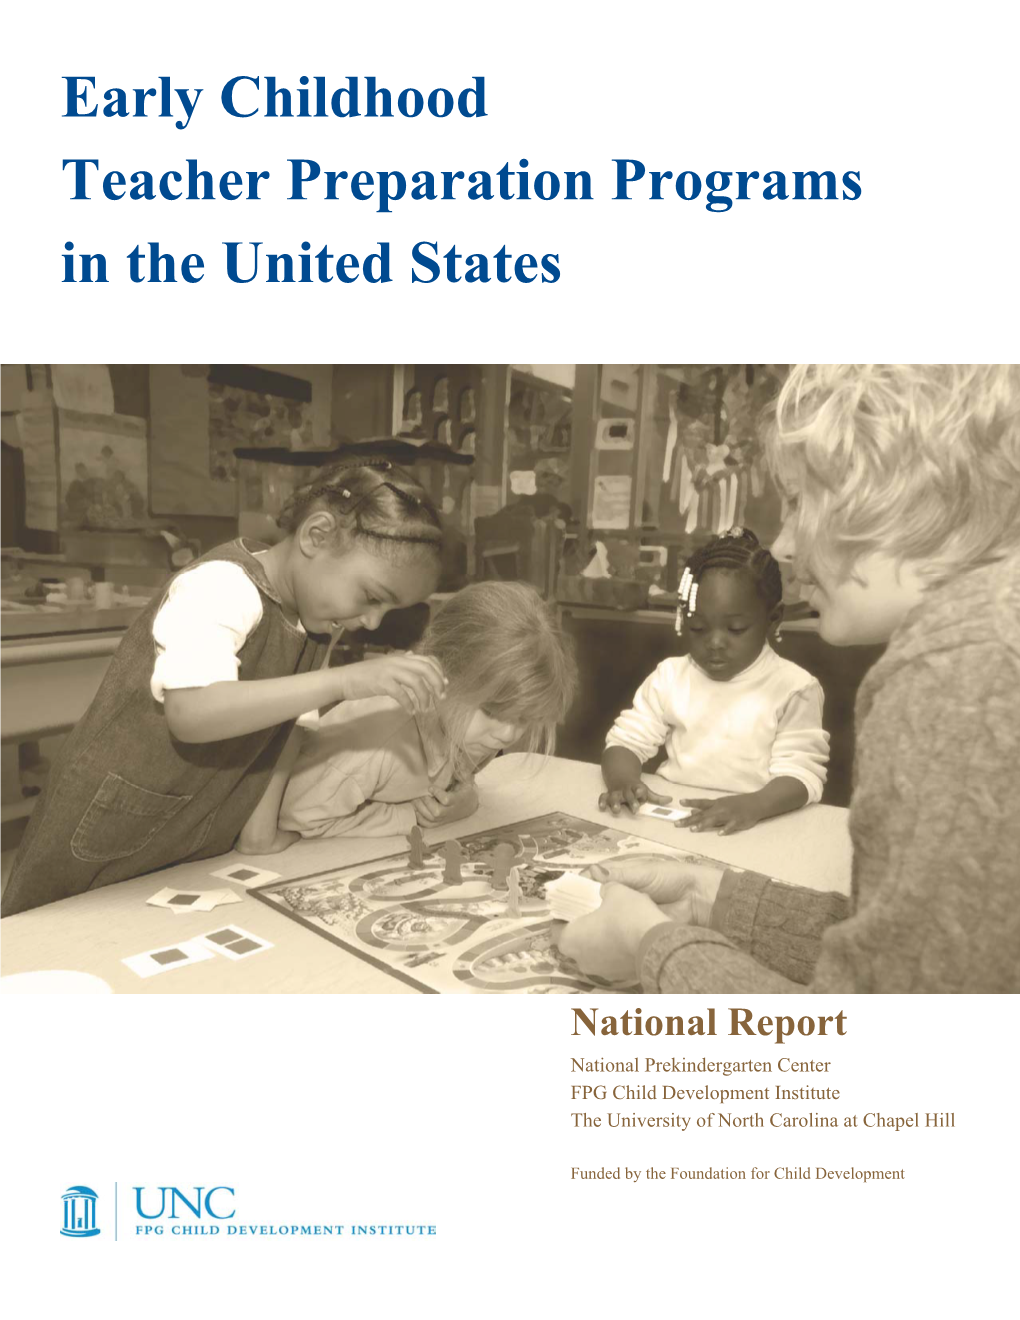 Early Childhood Teacher Preparation Programs in the United States